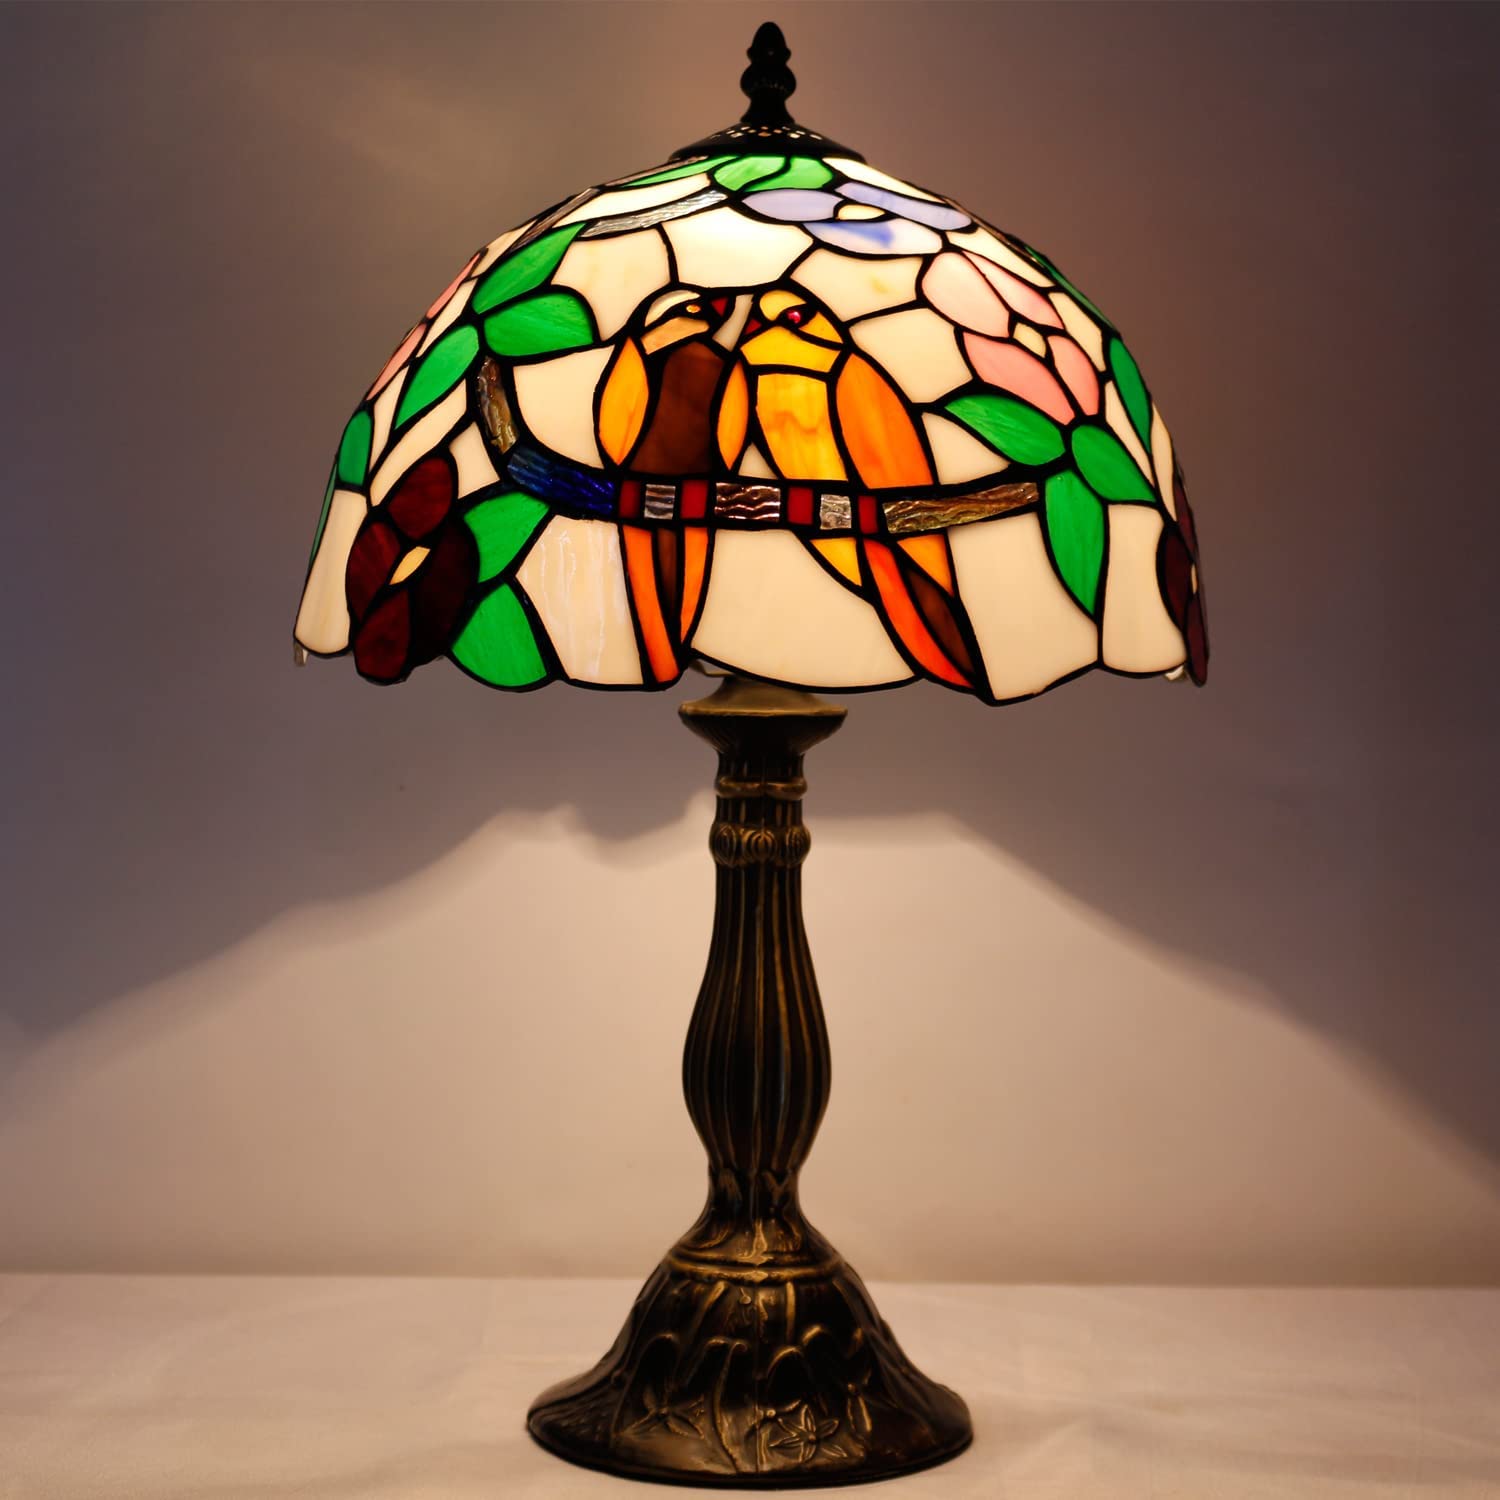 SHADY  Table Lamp Stained Glass Bedside Lamp Double Tropical Birds Desk Reading Light 12X12X18 Inches Decor Bedroom Living Room Home Office S803 Series